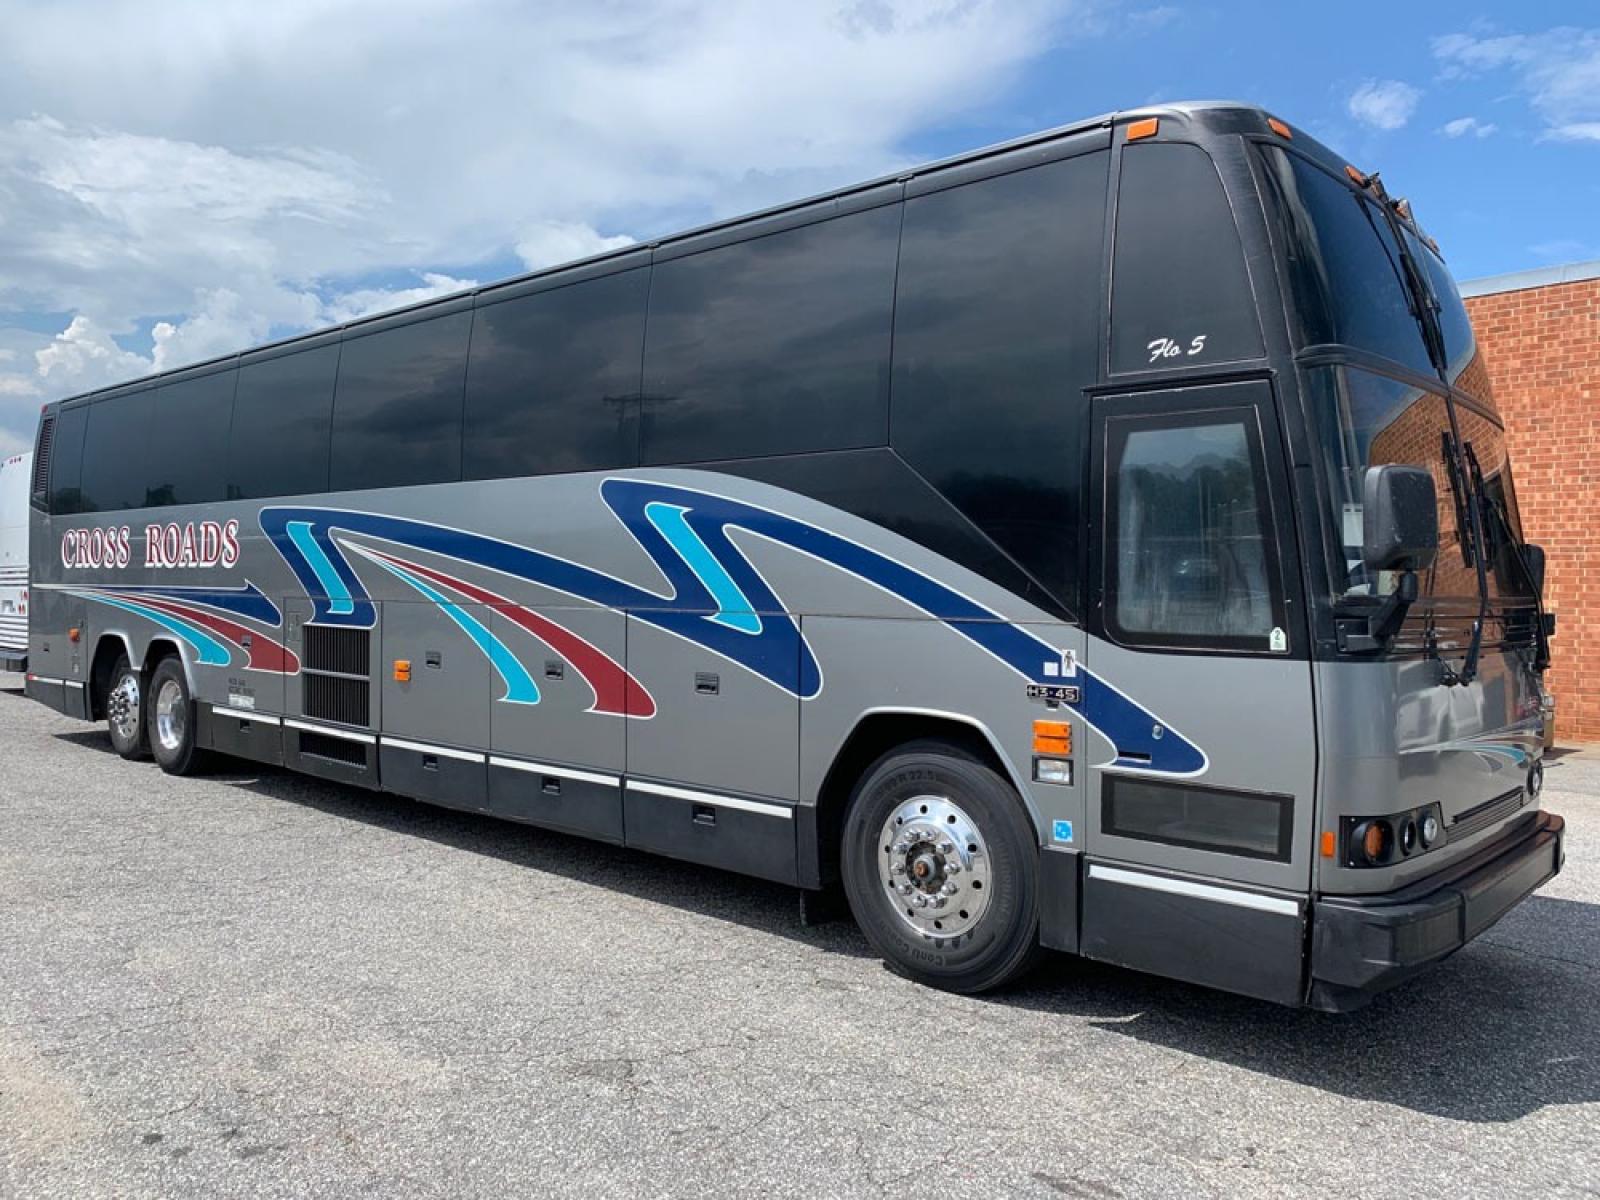 1998 Prevost HS-45 with an Detroit Diesel Series 60 engine, Allison transmission, 0.000000, 0.000000 - 1998 Prevost H3-45 - Series 60 Detroit Diesel - Allison Automatic Transmission - 45' - 56 Passengers -Enclosed Parcel Racks - 5 Flat Screens and DVD - Photo #0